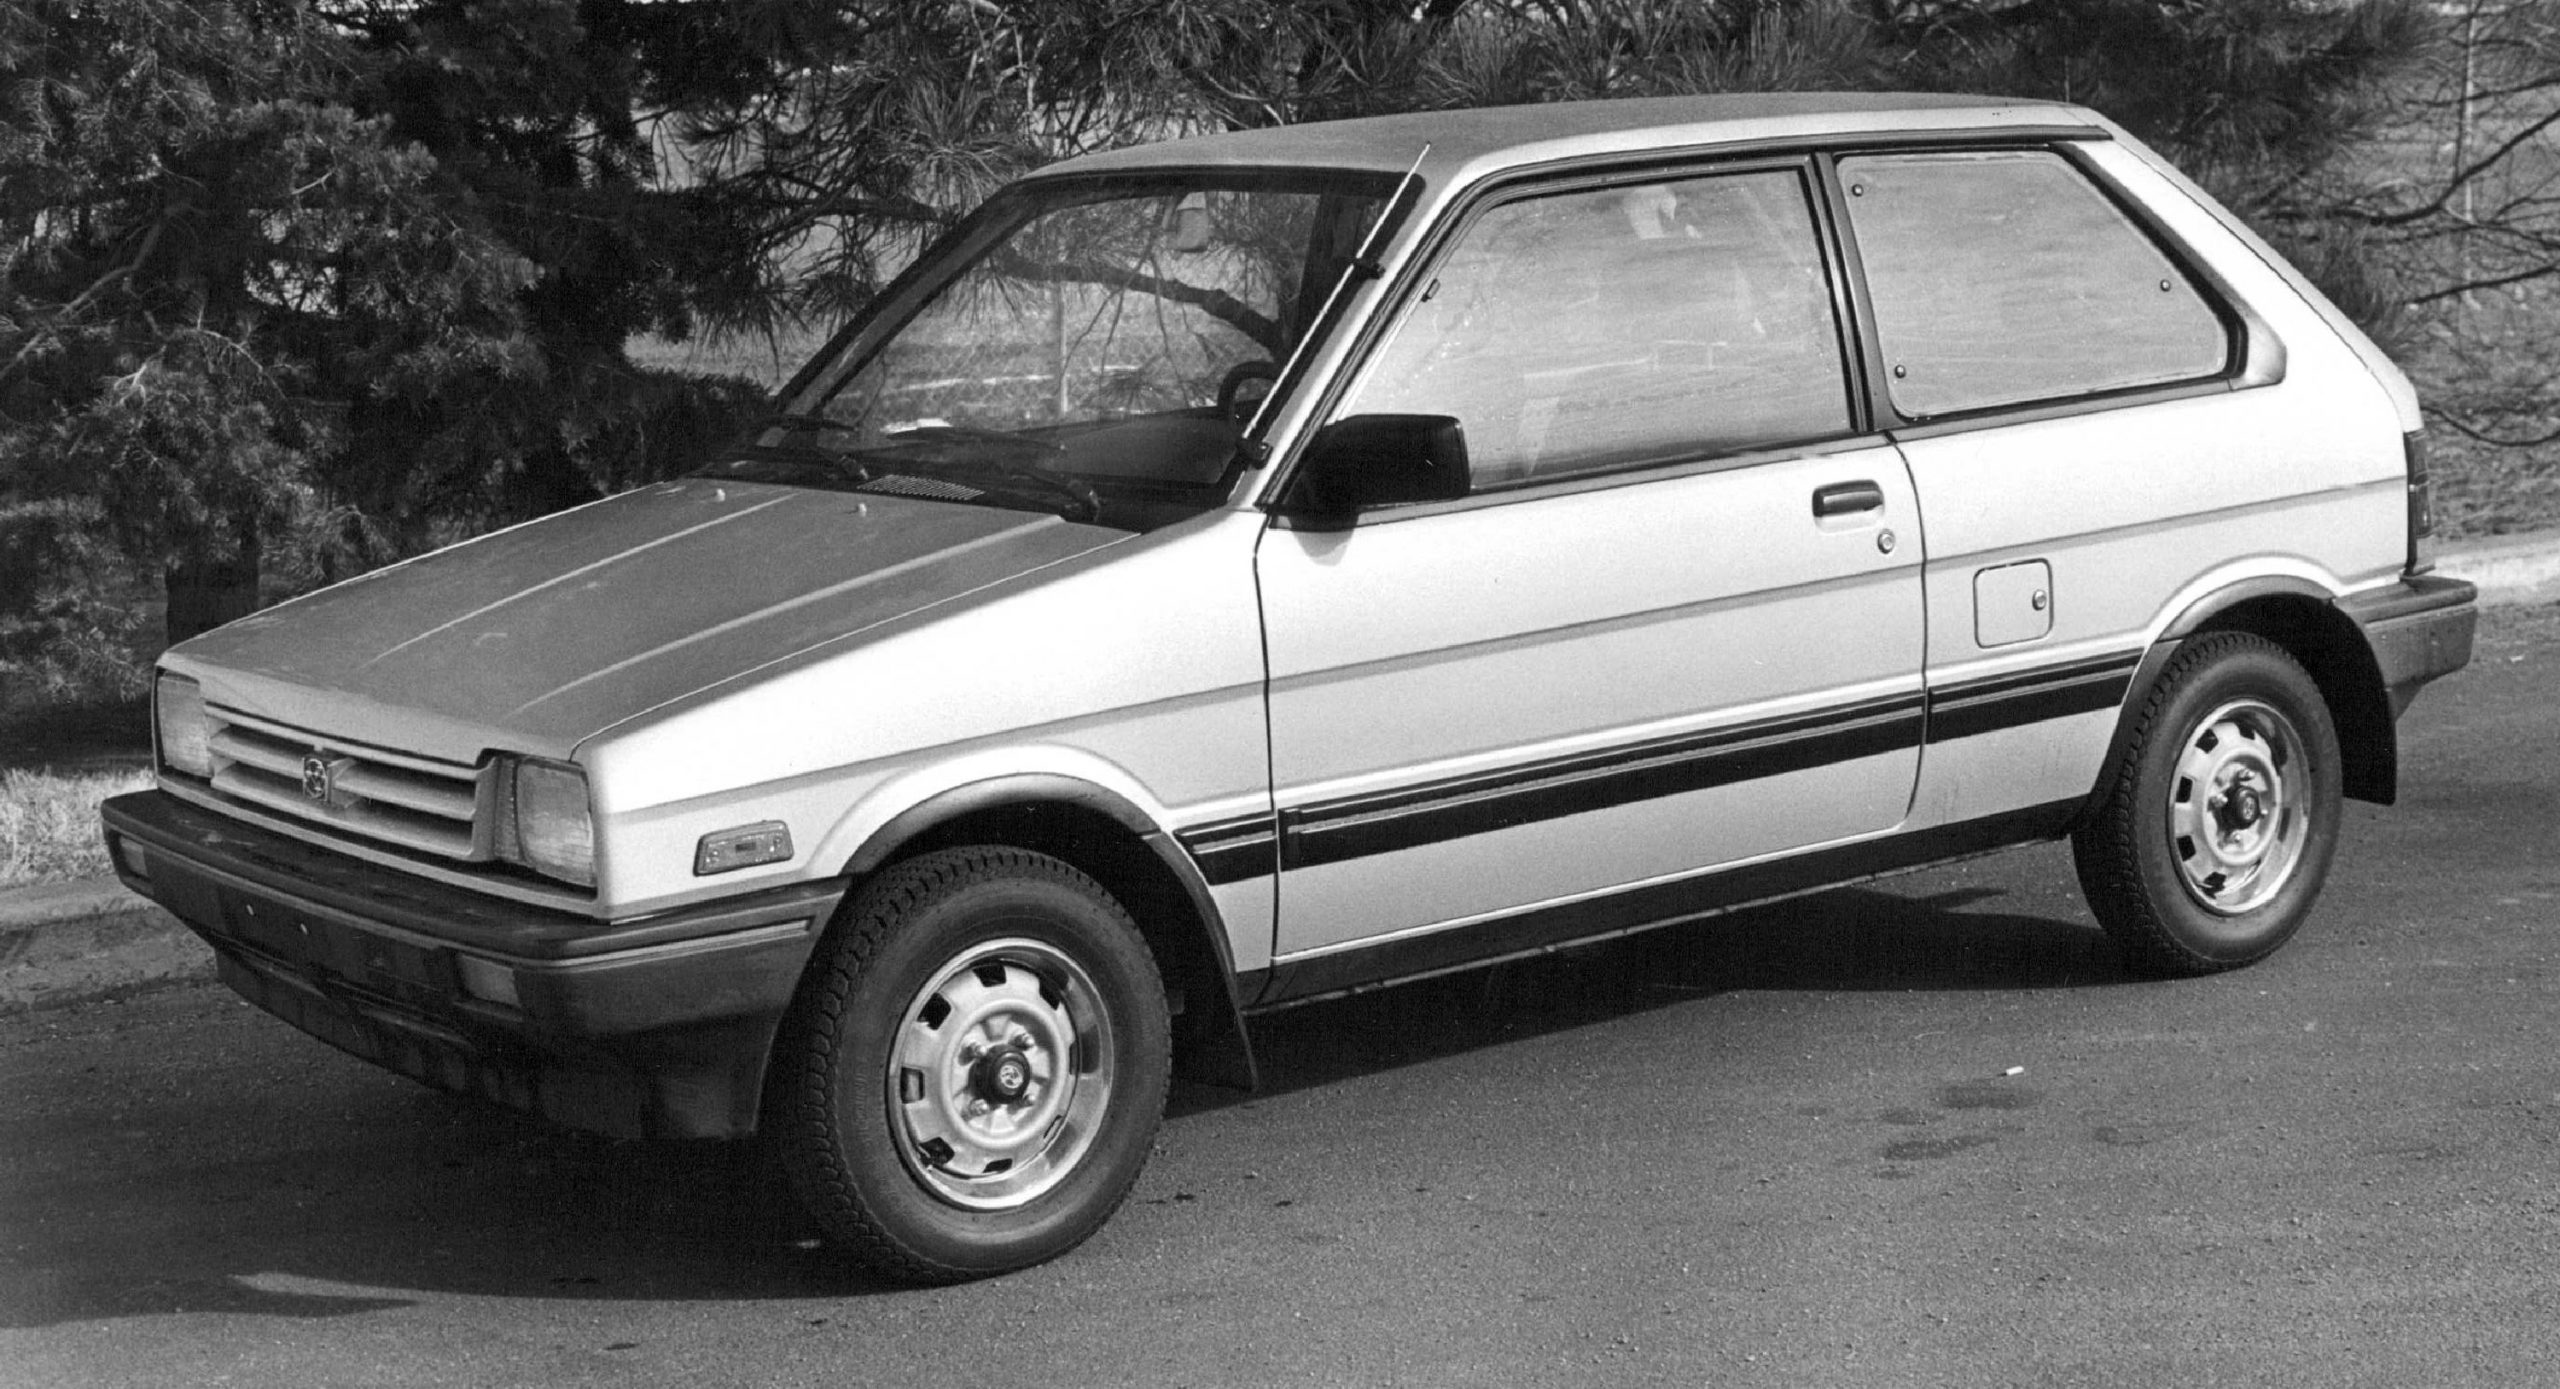 A black and white image of a late 1980s Subaru Justy hatchback